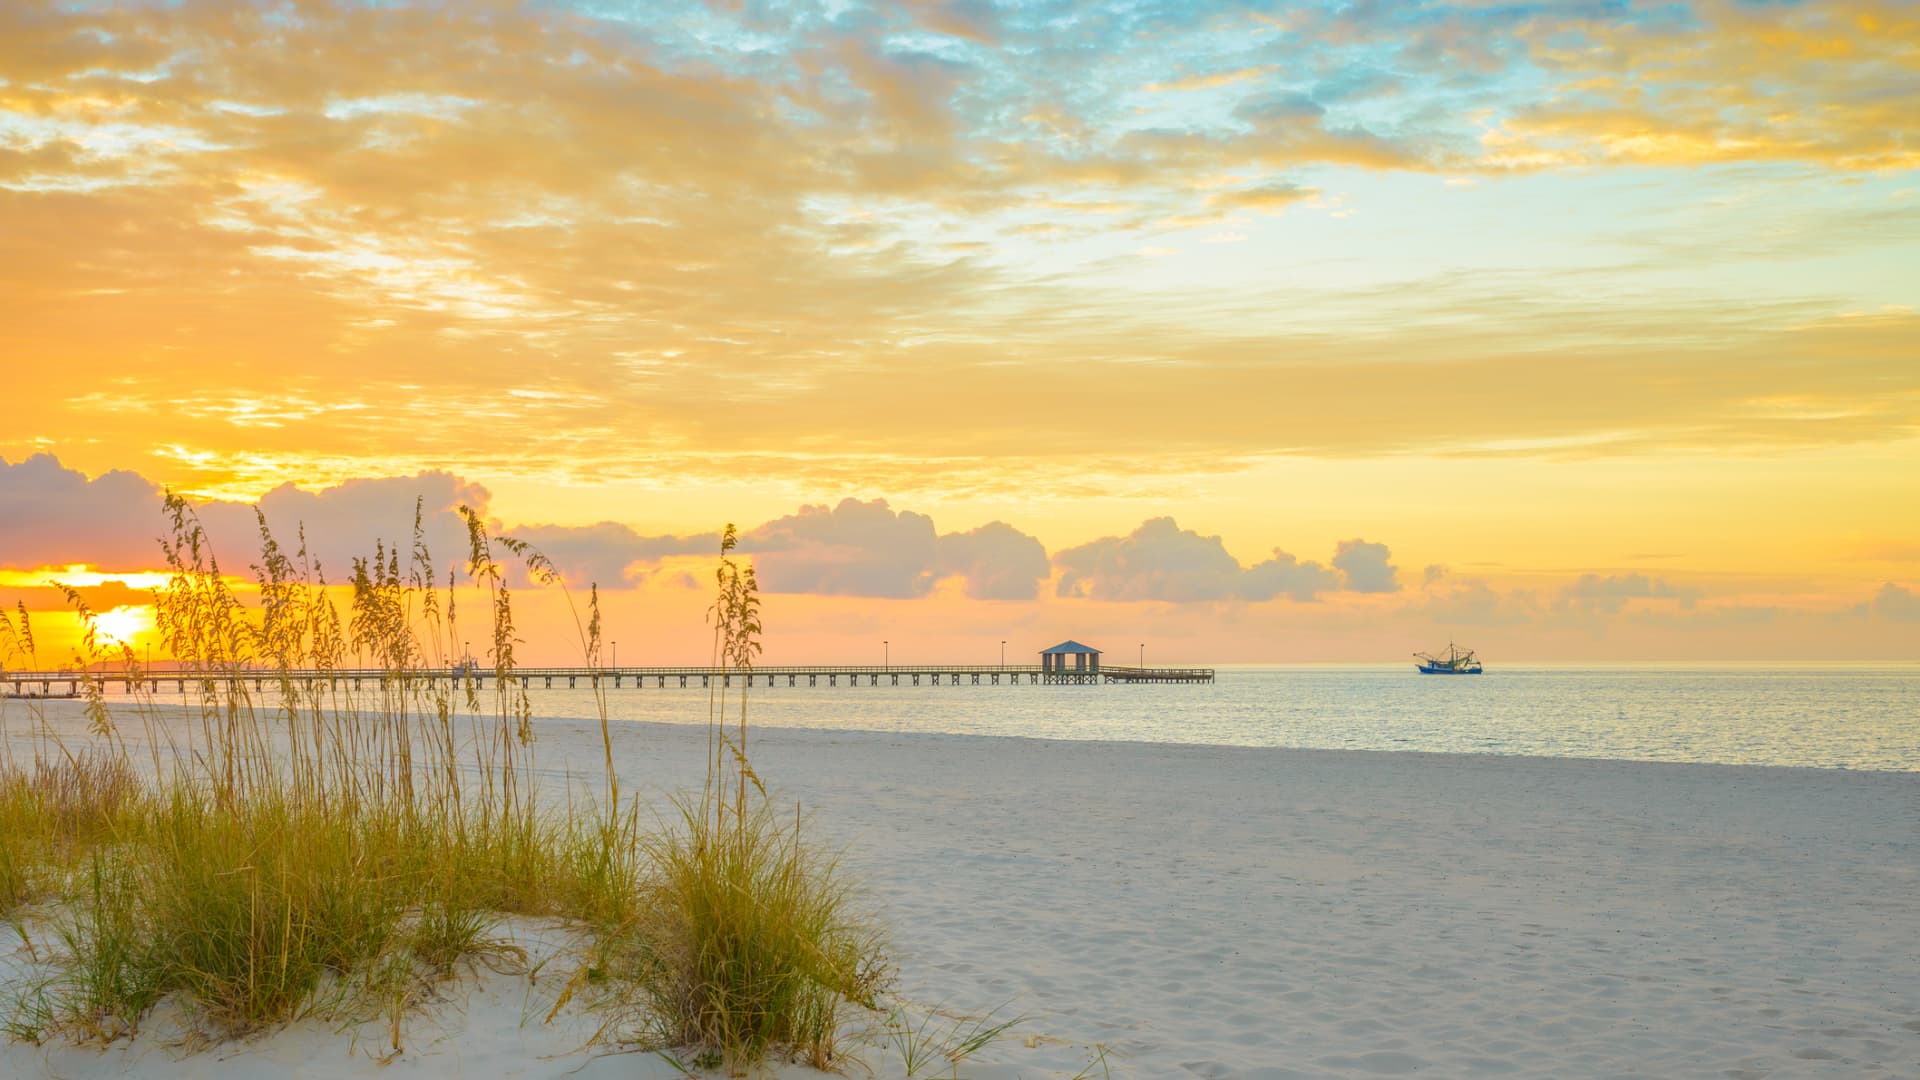 Gulfport, Mississippi, ranked as the cheapest town in which to buy a beach house, according to Realtor.com.